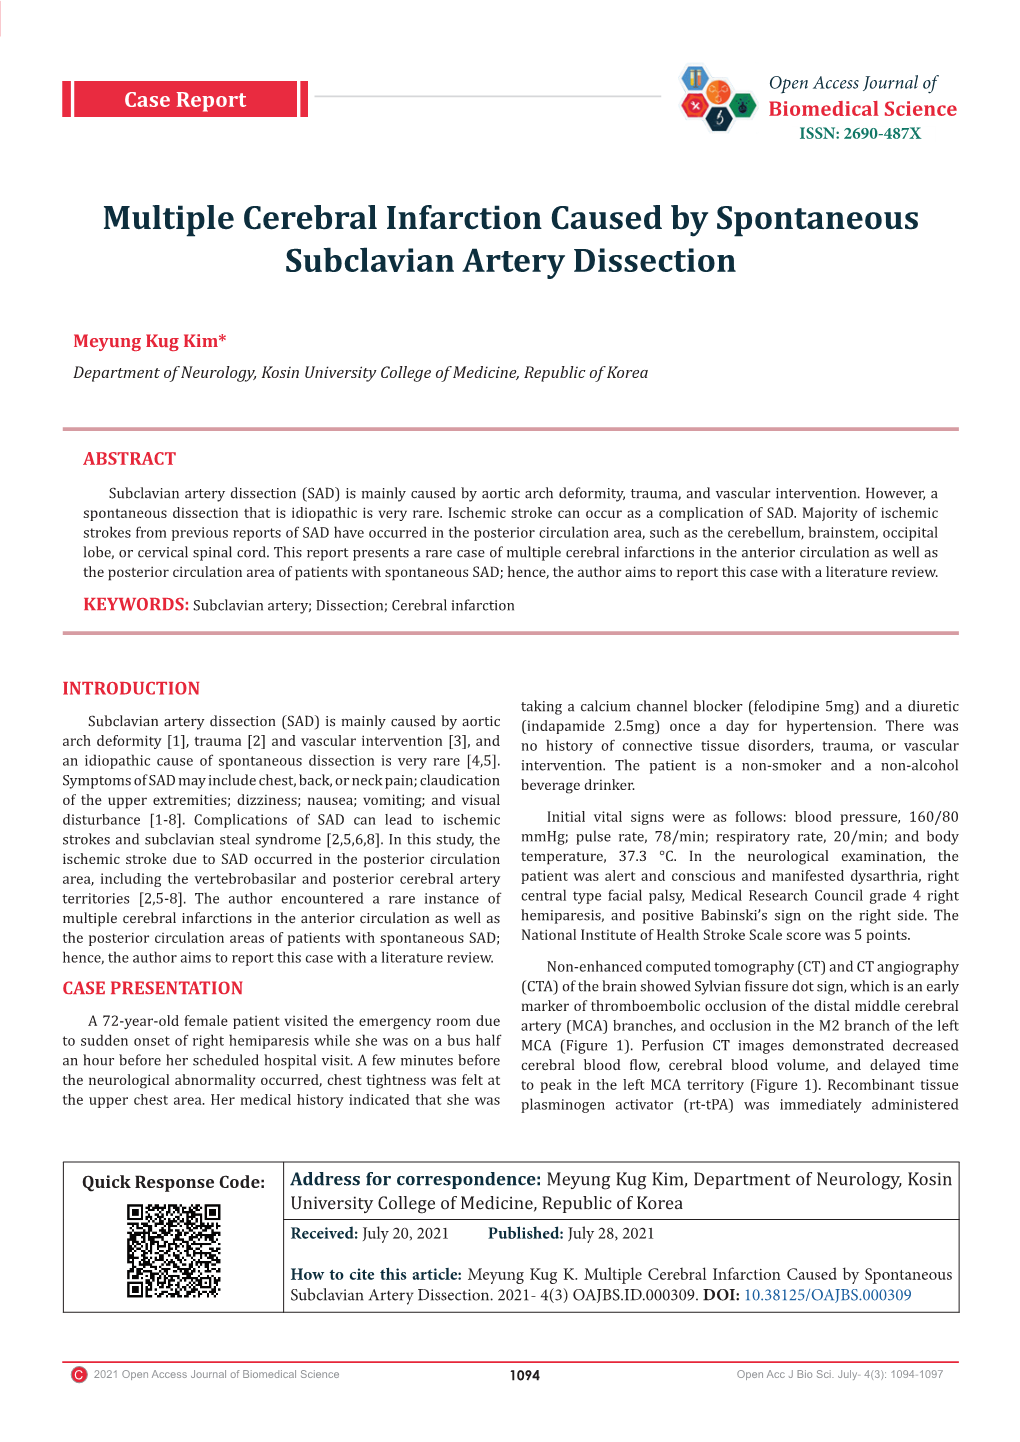 Multiple Cerebral Infarction Caused by Spontaneous Subclavian Artery Dissection